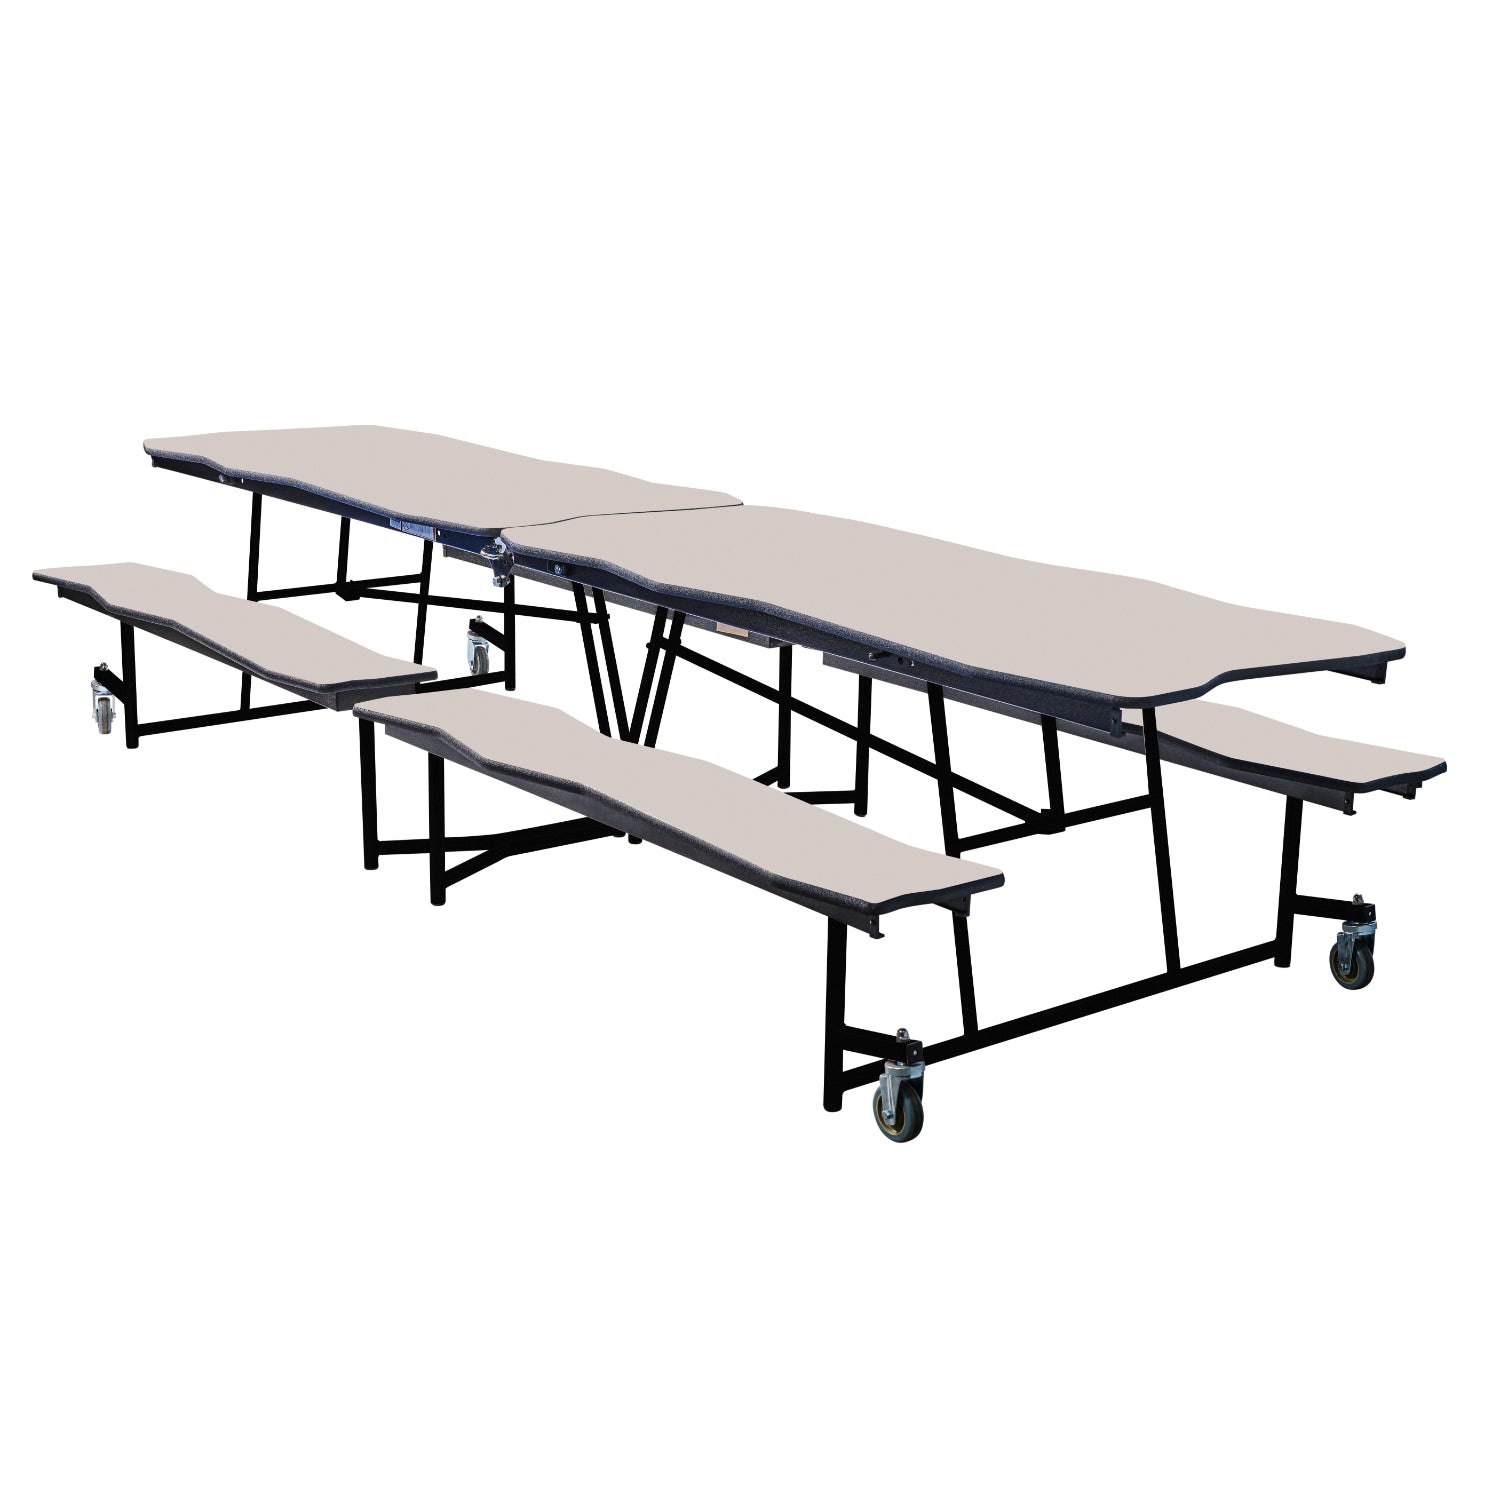 Mobile Cafeteria Table with Benches, 10' Bedrock, Plywood Core, Vinyl T-Mold Edge, Textured Black Frame